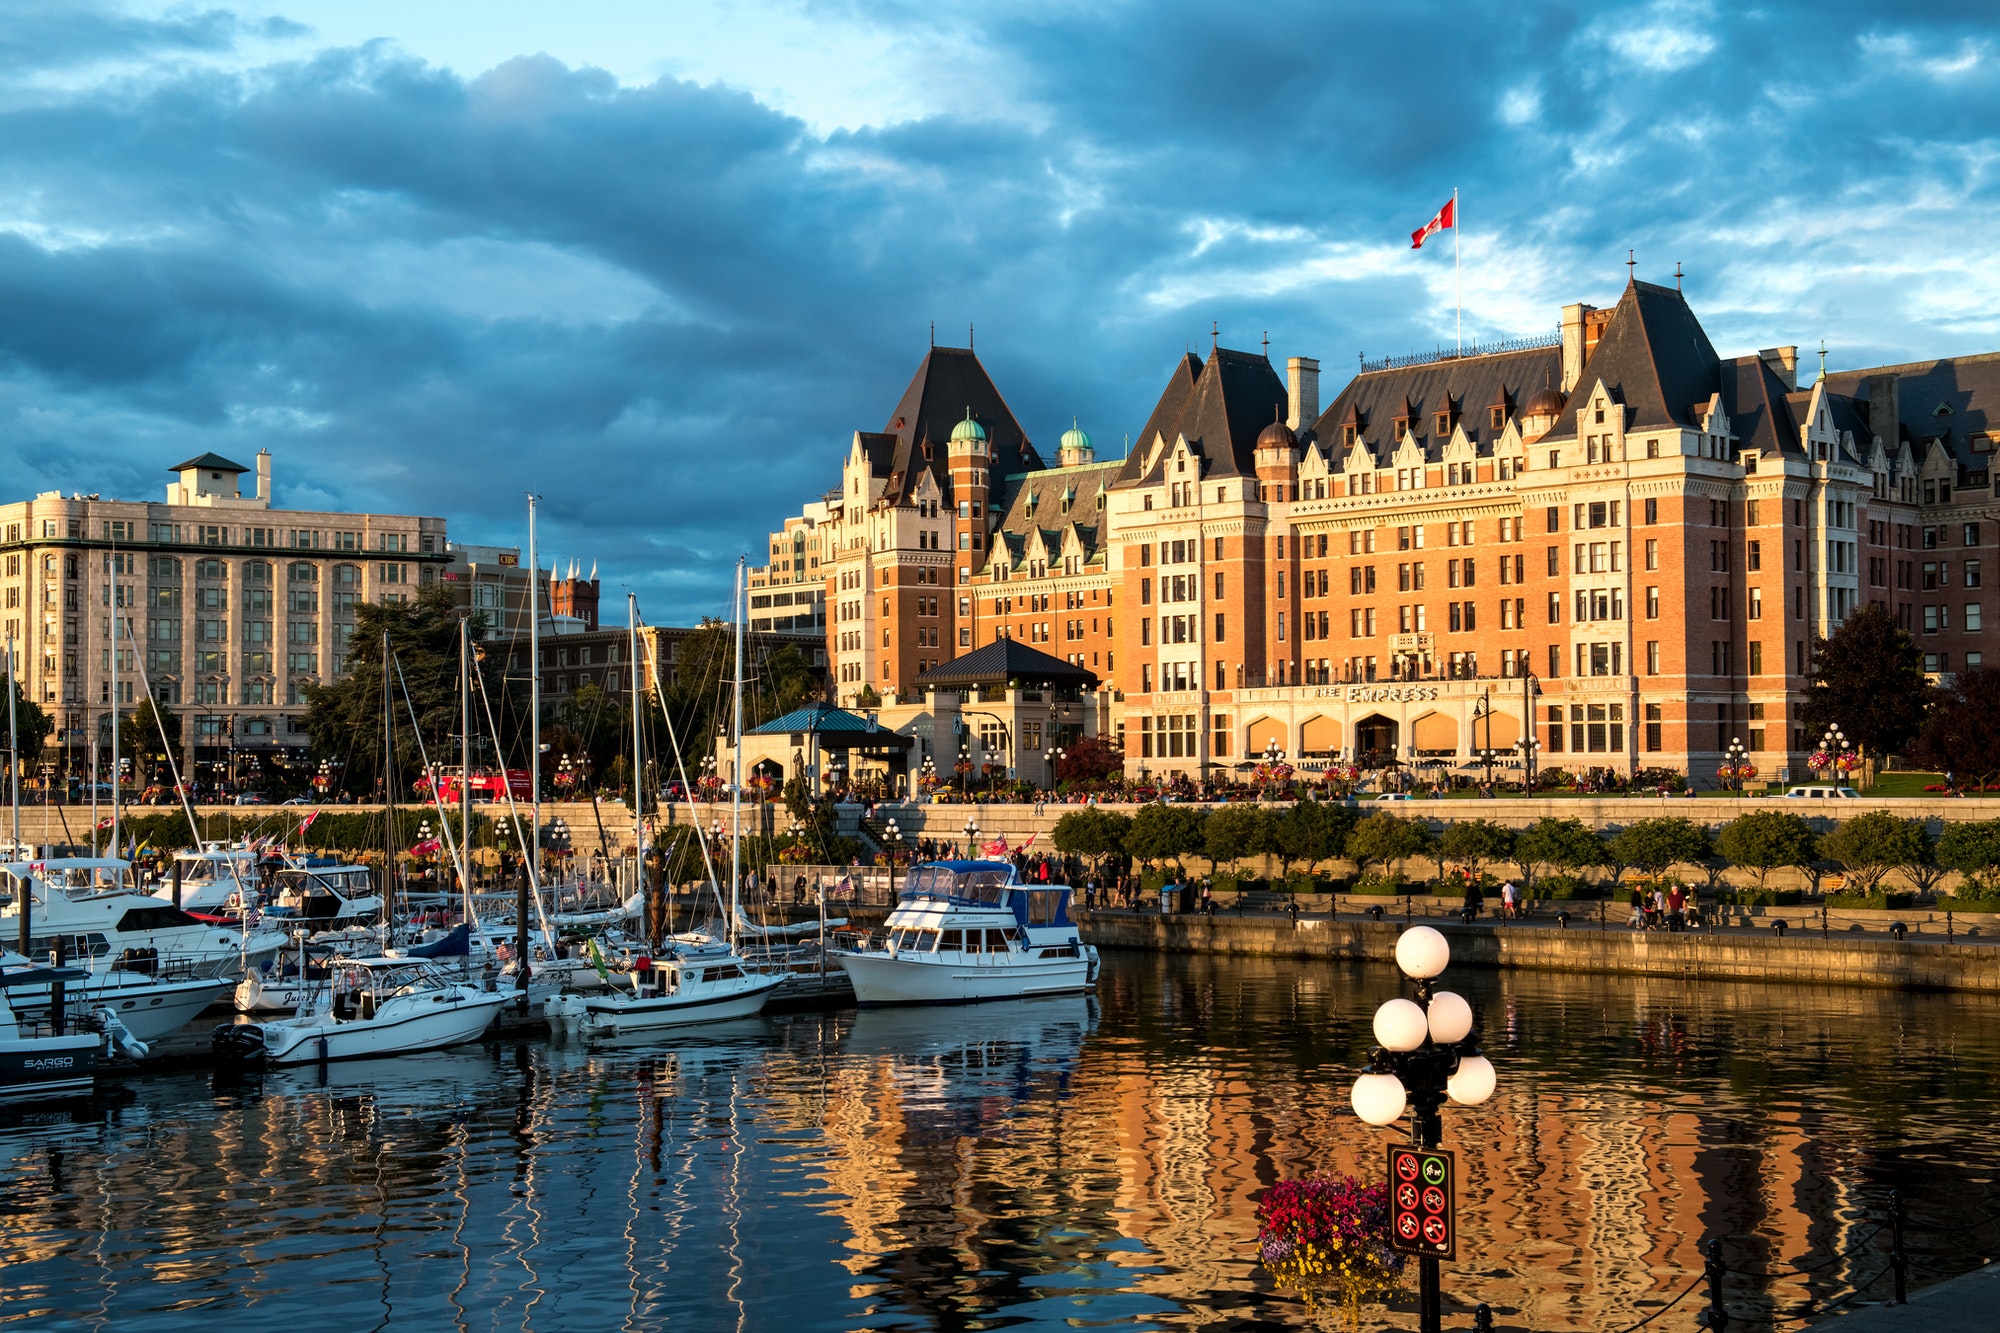 Hotel building behind the port in Victoria, Vancouver Island, Canada